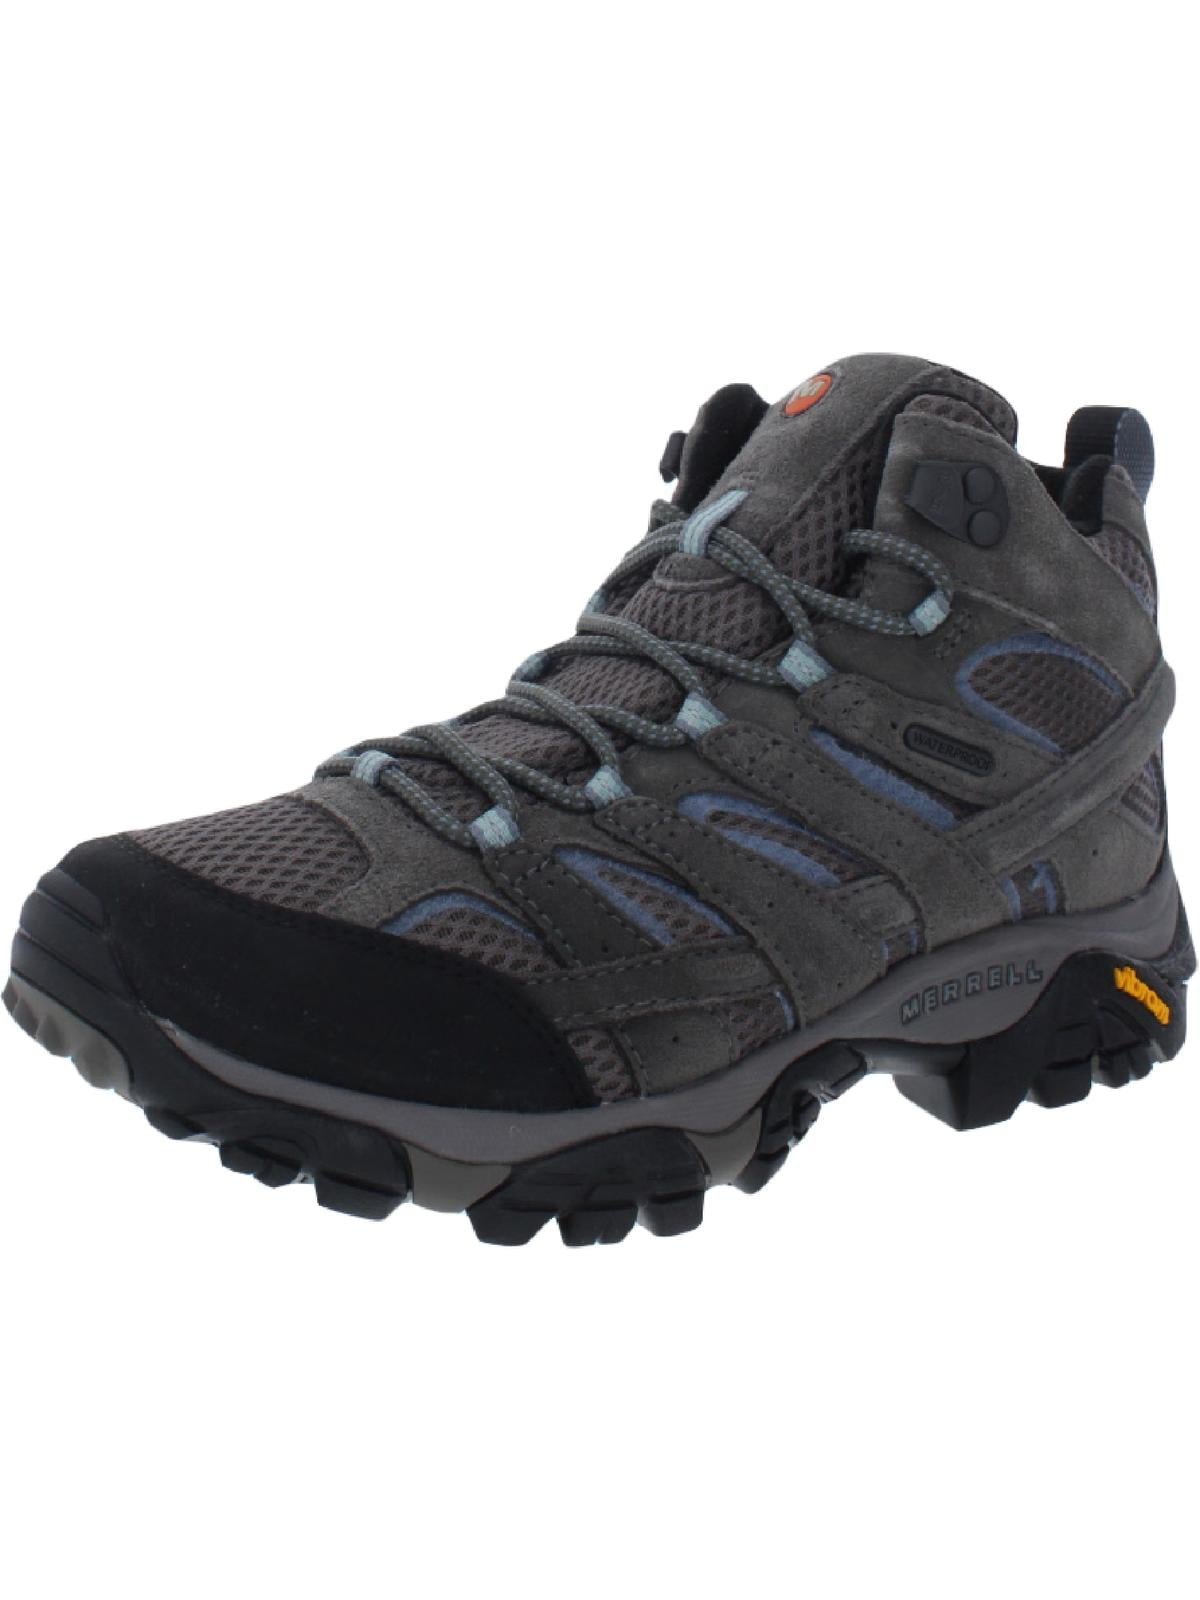 men non-metal safety toe & mid sole fully composite hiker type boot sizes 4-14 